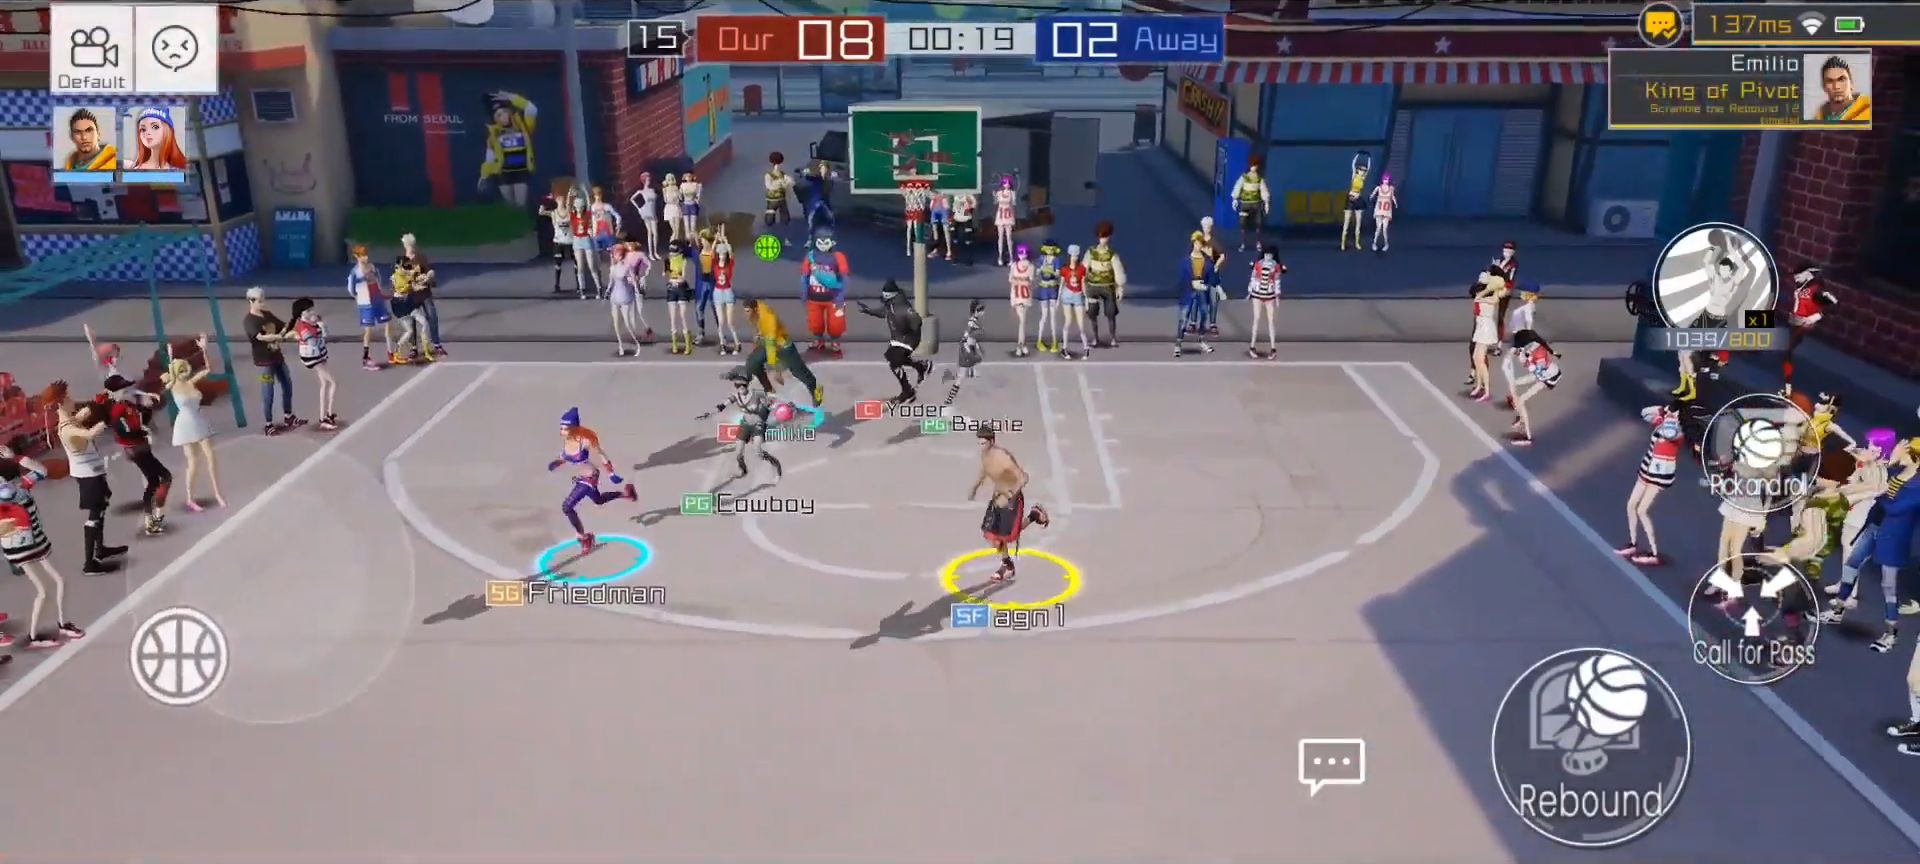 Scarica Streetball2: On Fire gratis per Android.